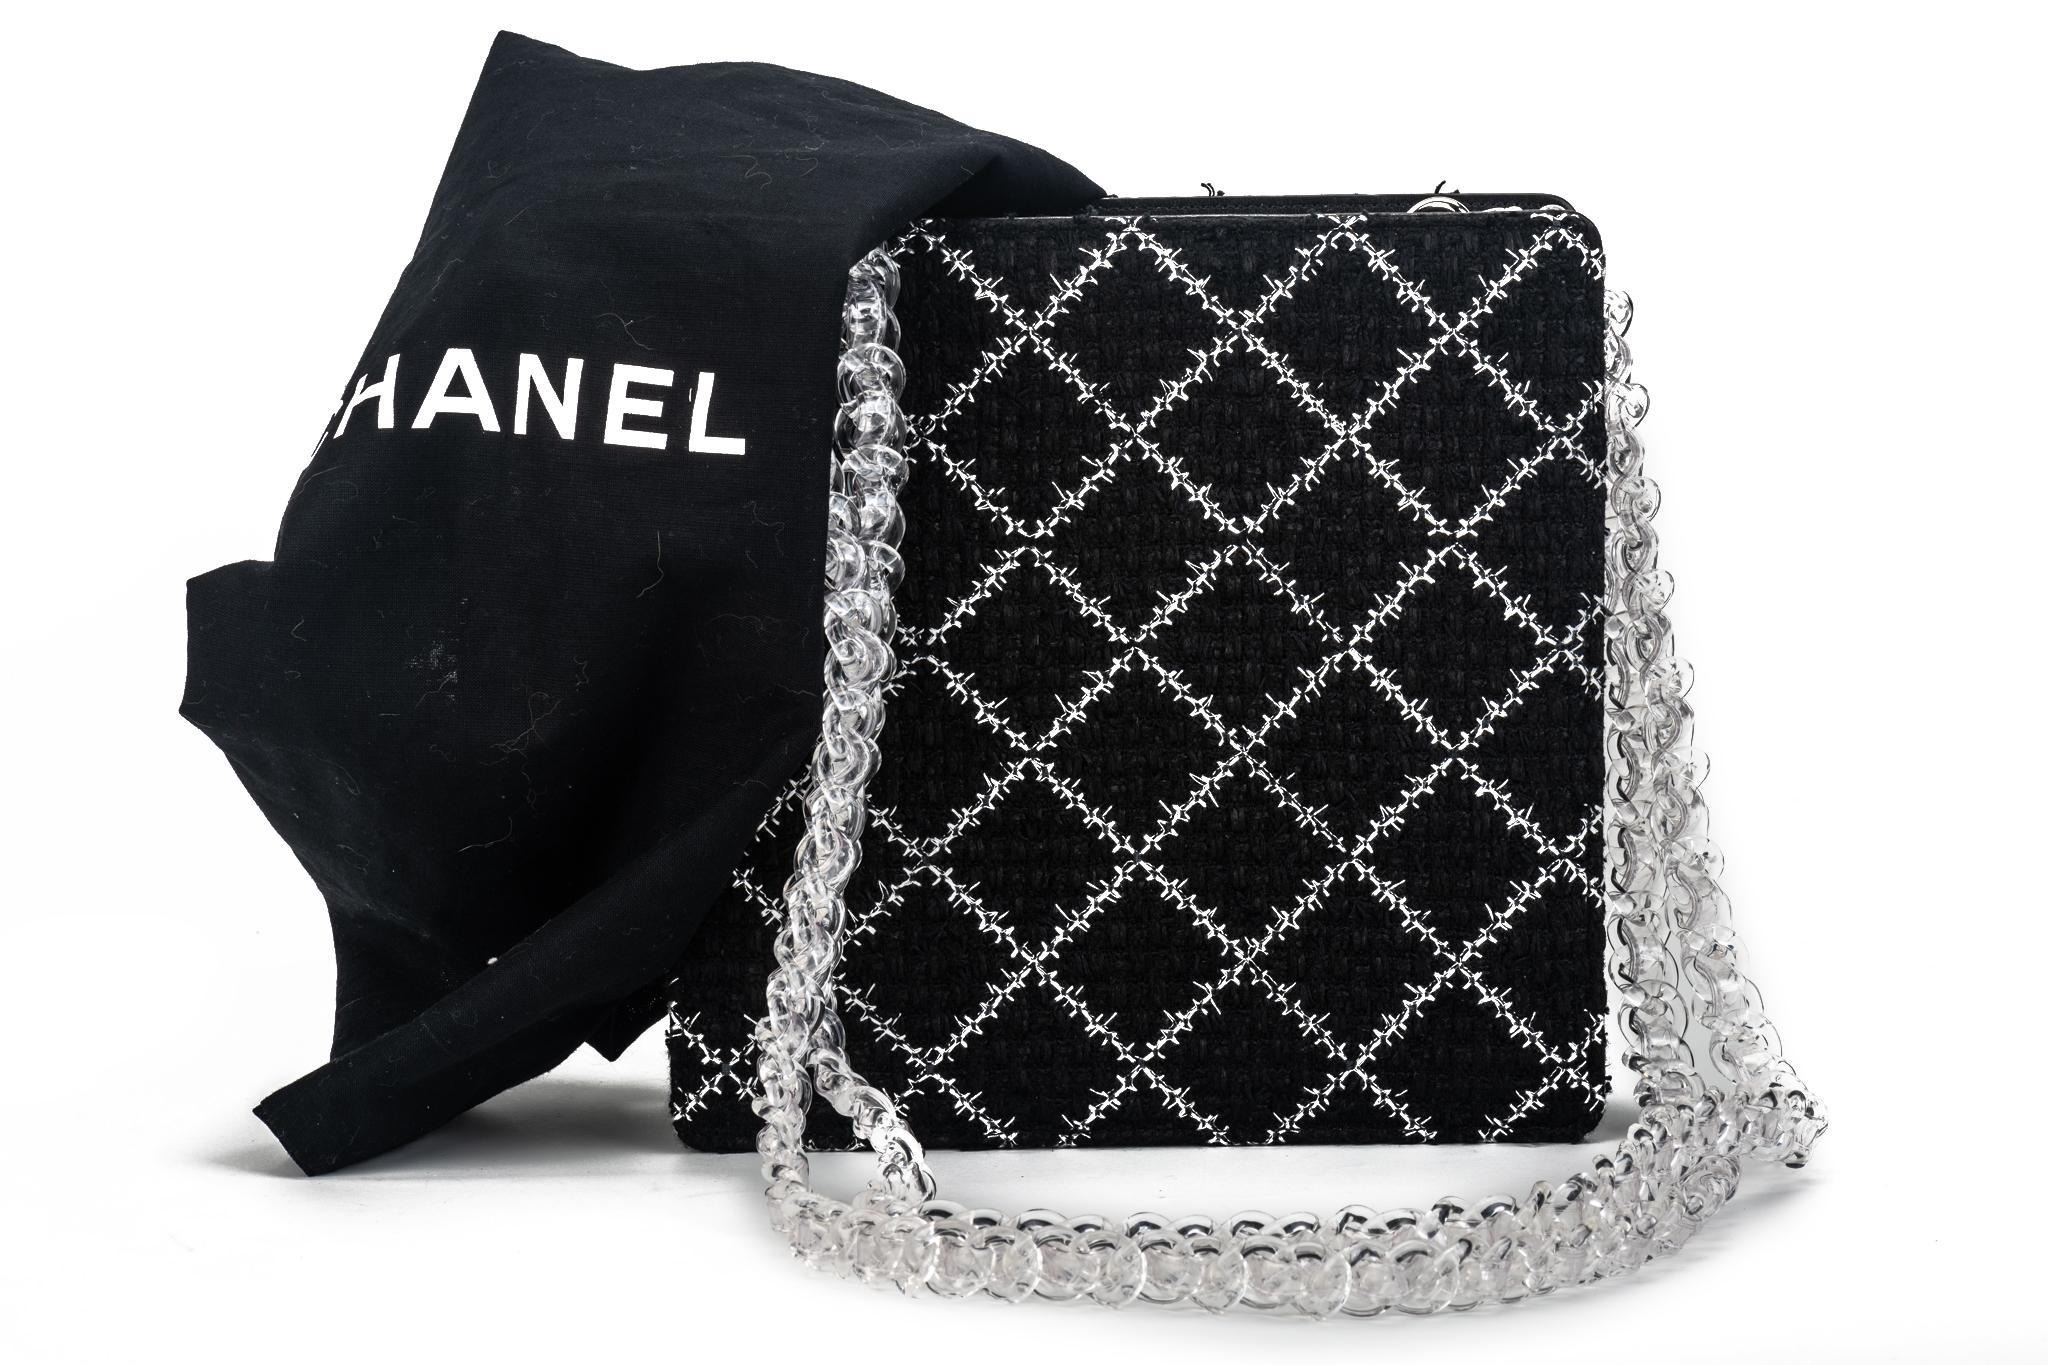 Chanel brand new rare and collectible shoulder bag with lucite straps. Collection 2017. Shoulder drop 18